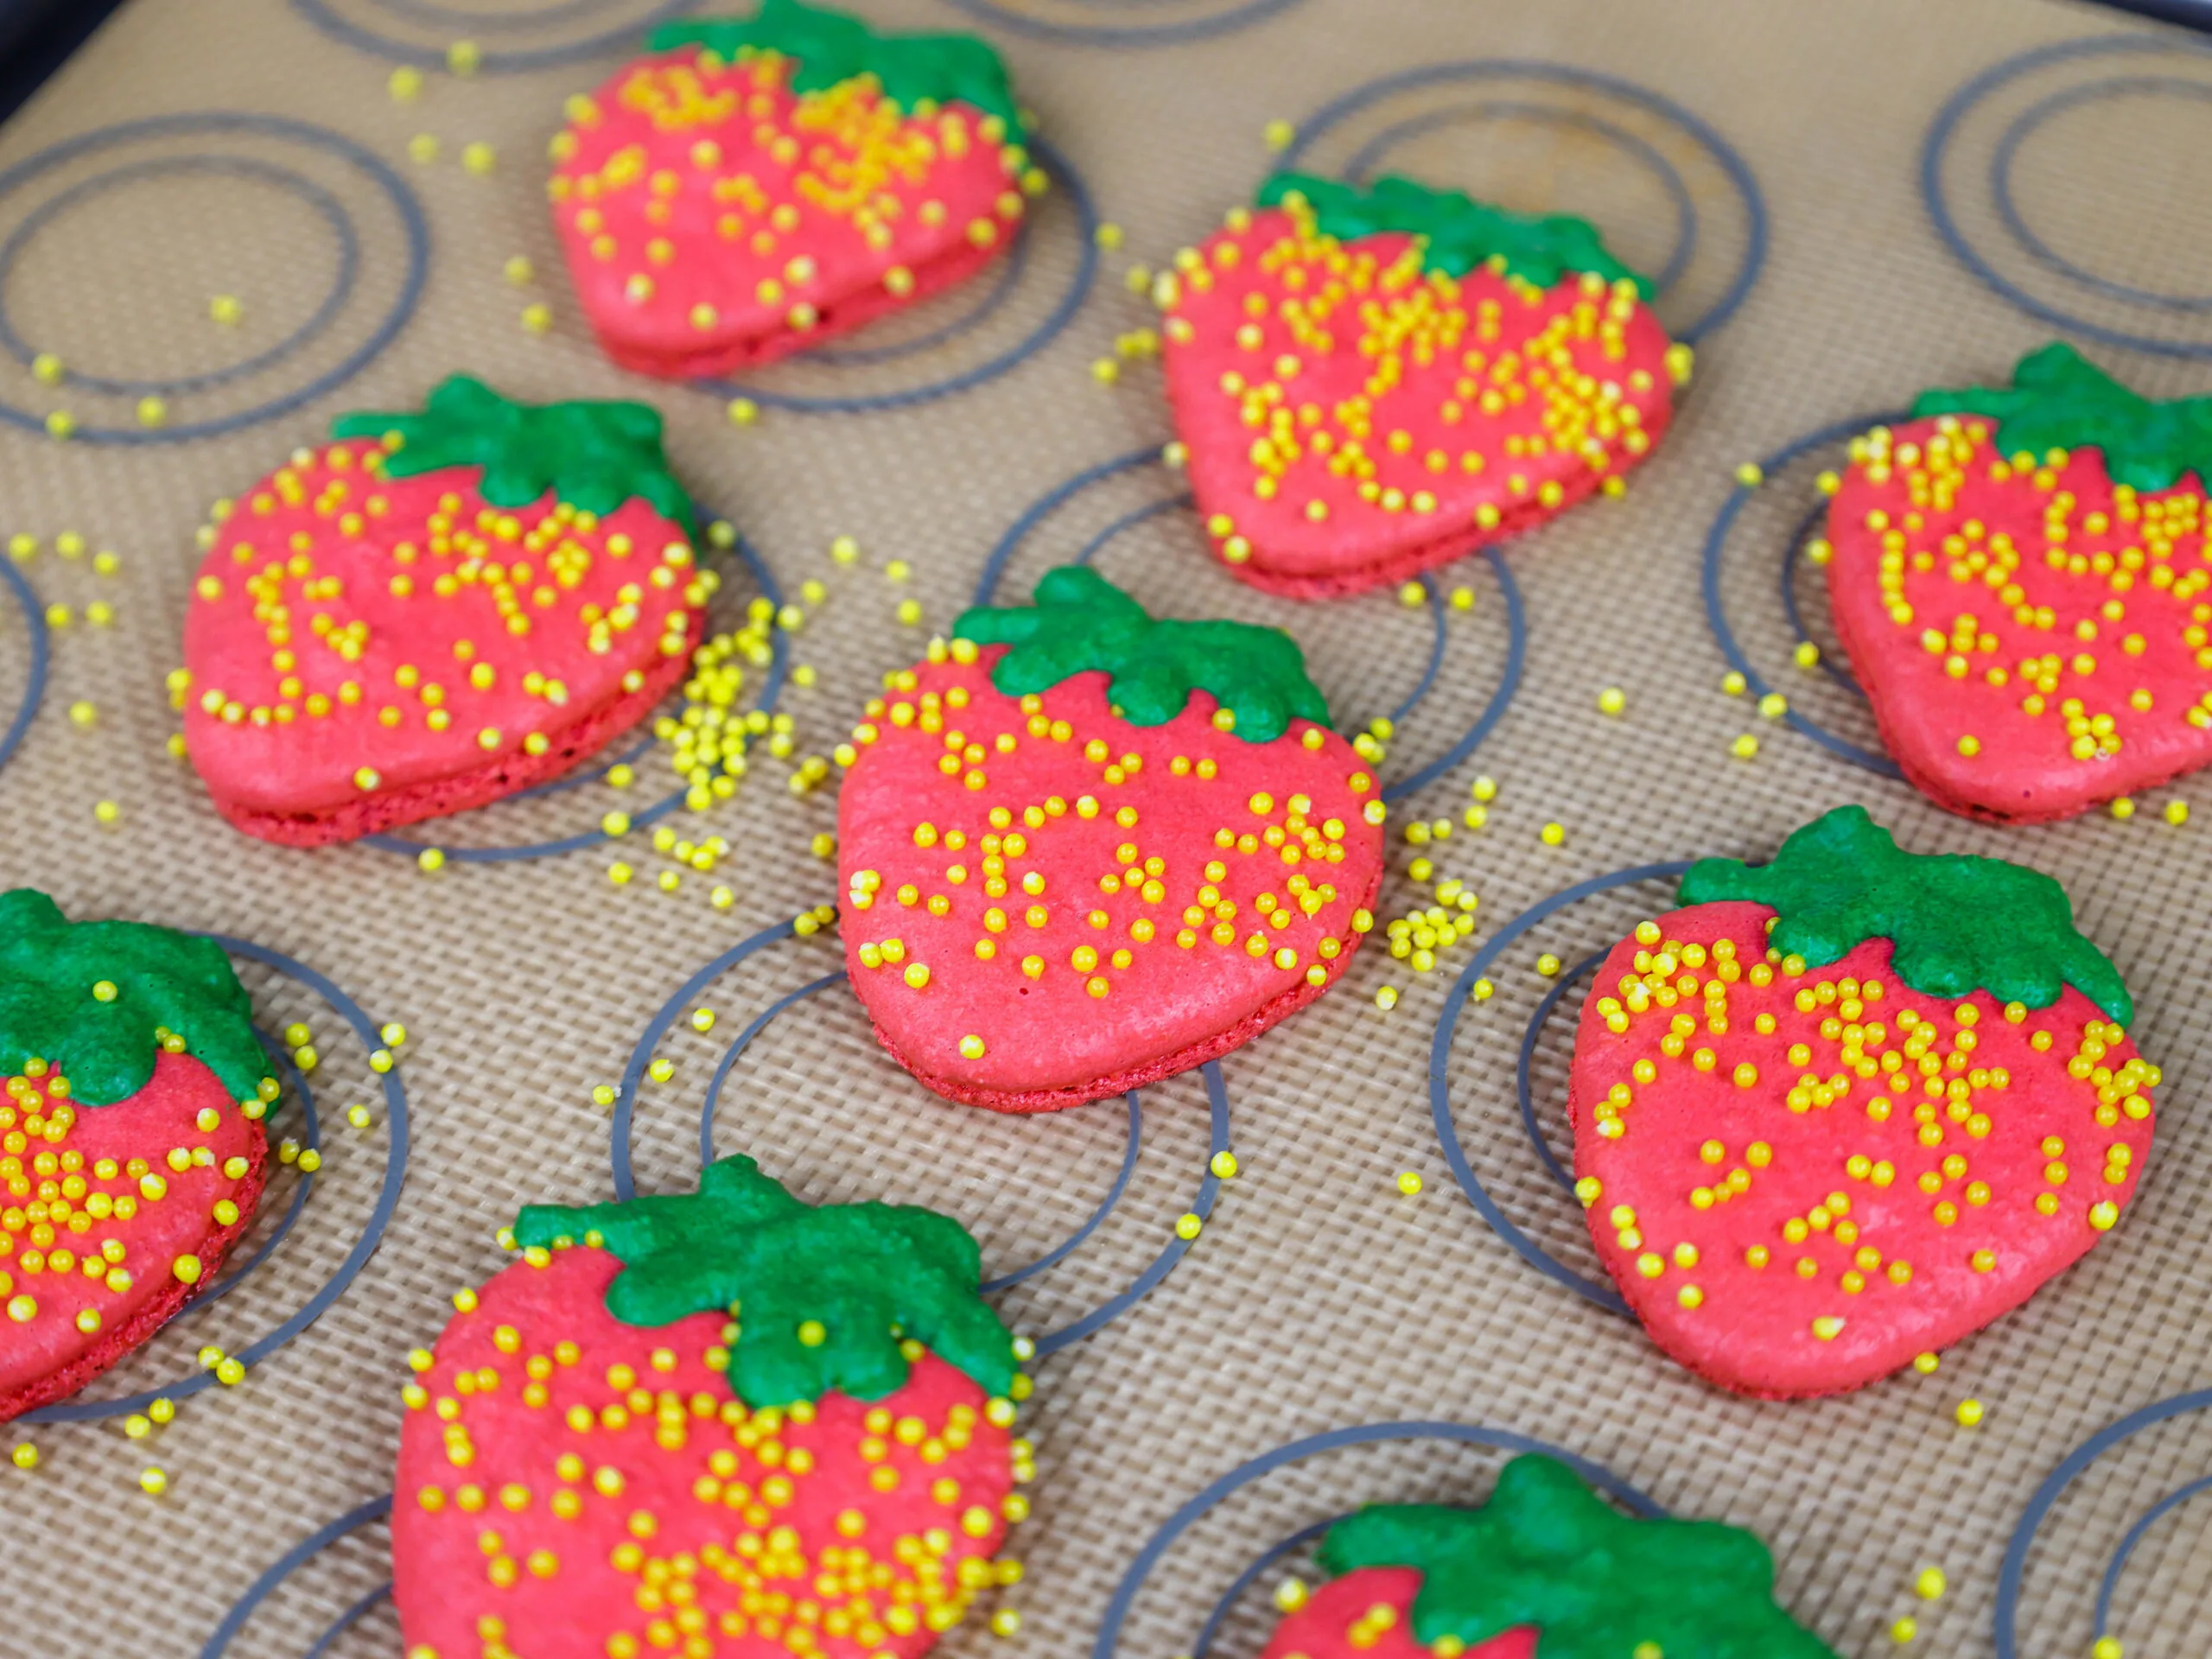 image of strawberry shaped macaron shells that have been baked and have nice feet